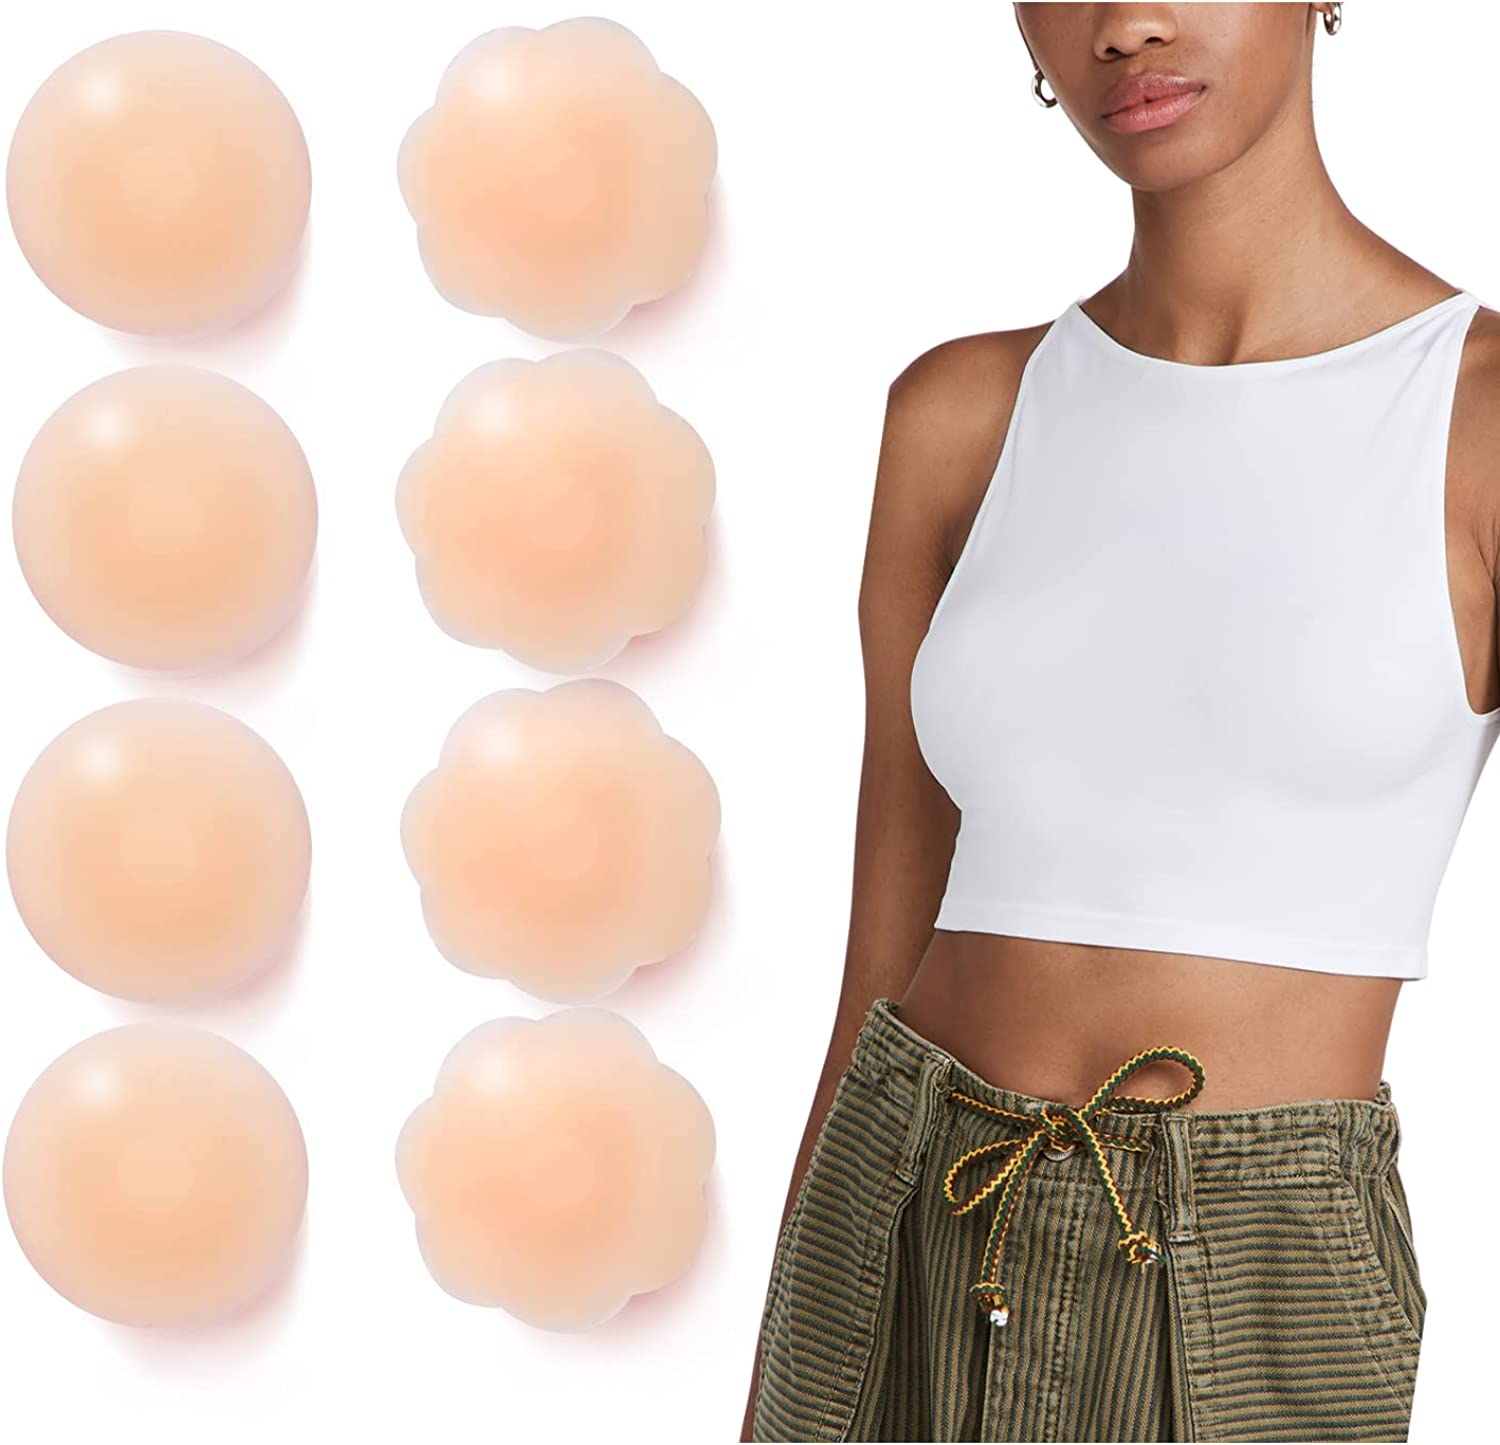 VOCH GALA Nipple Cover 4 Pairs, Silicone Breast Petals, Nipple Pasties